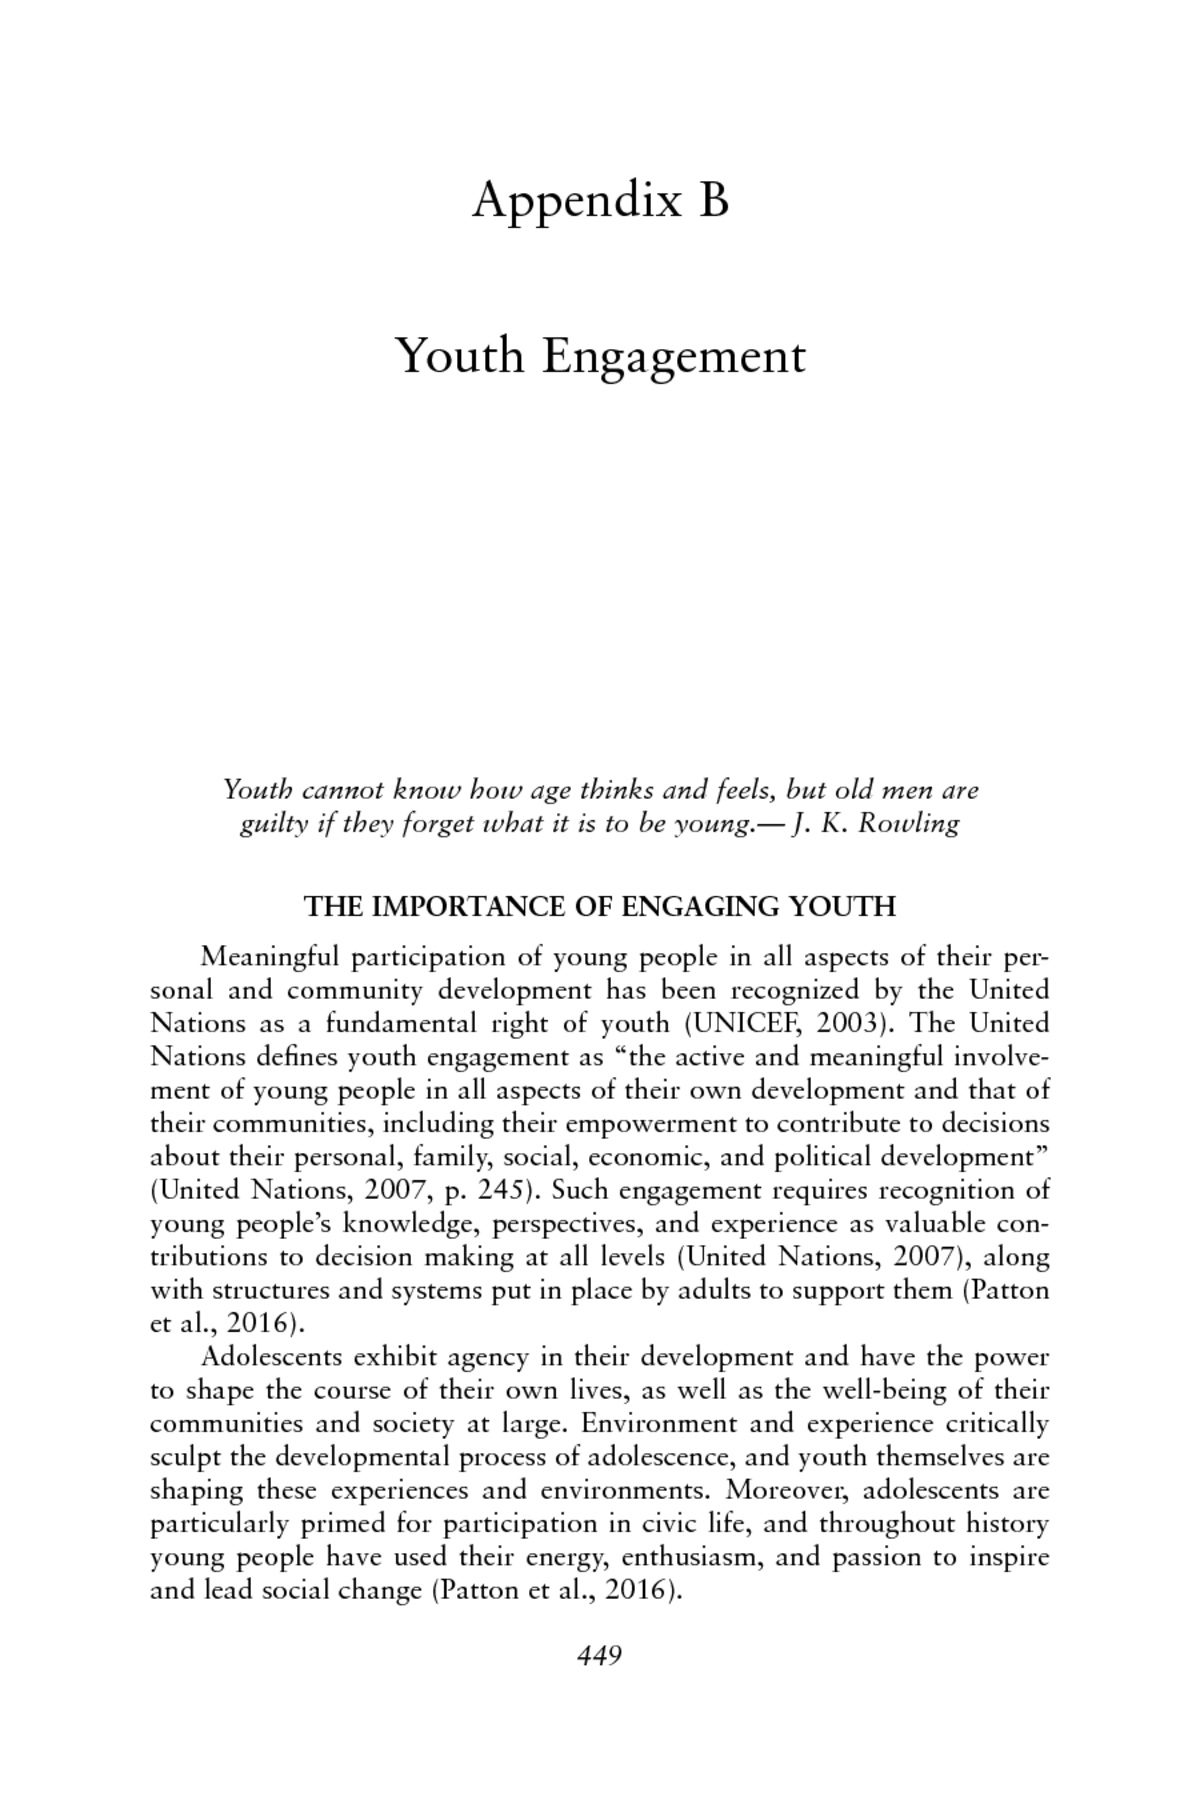 essay title about youth